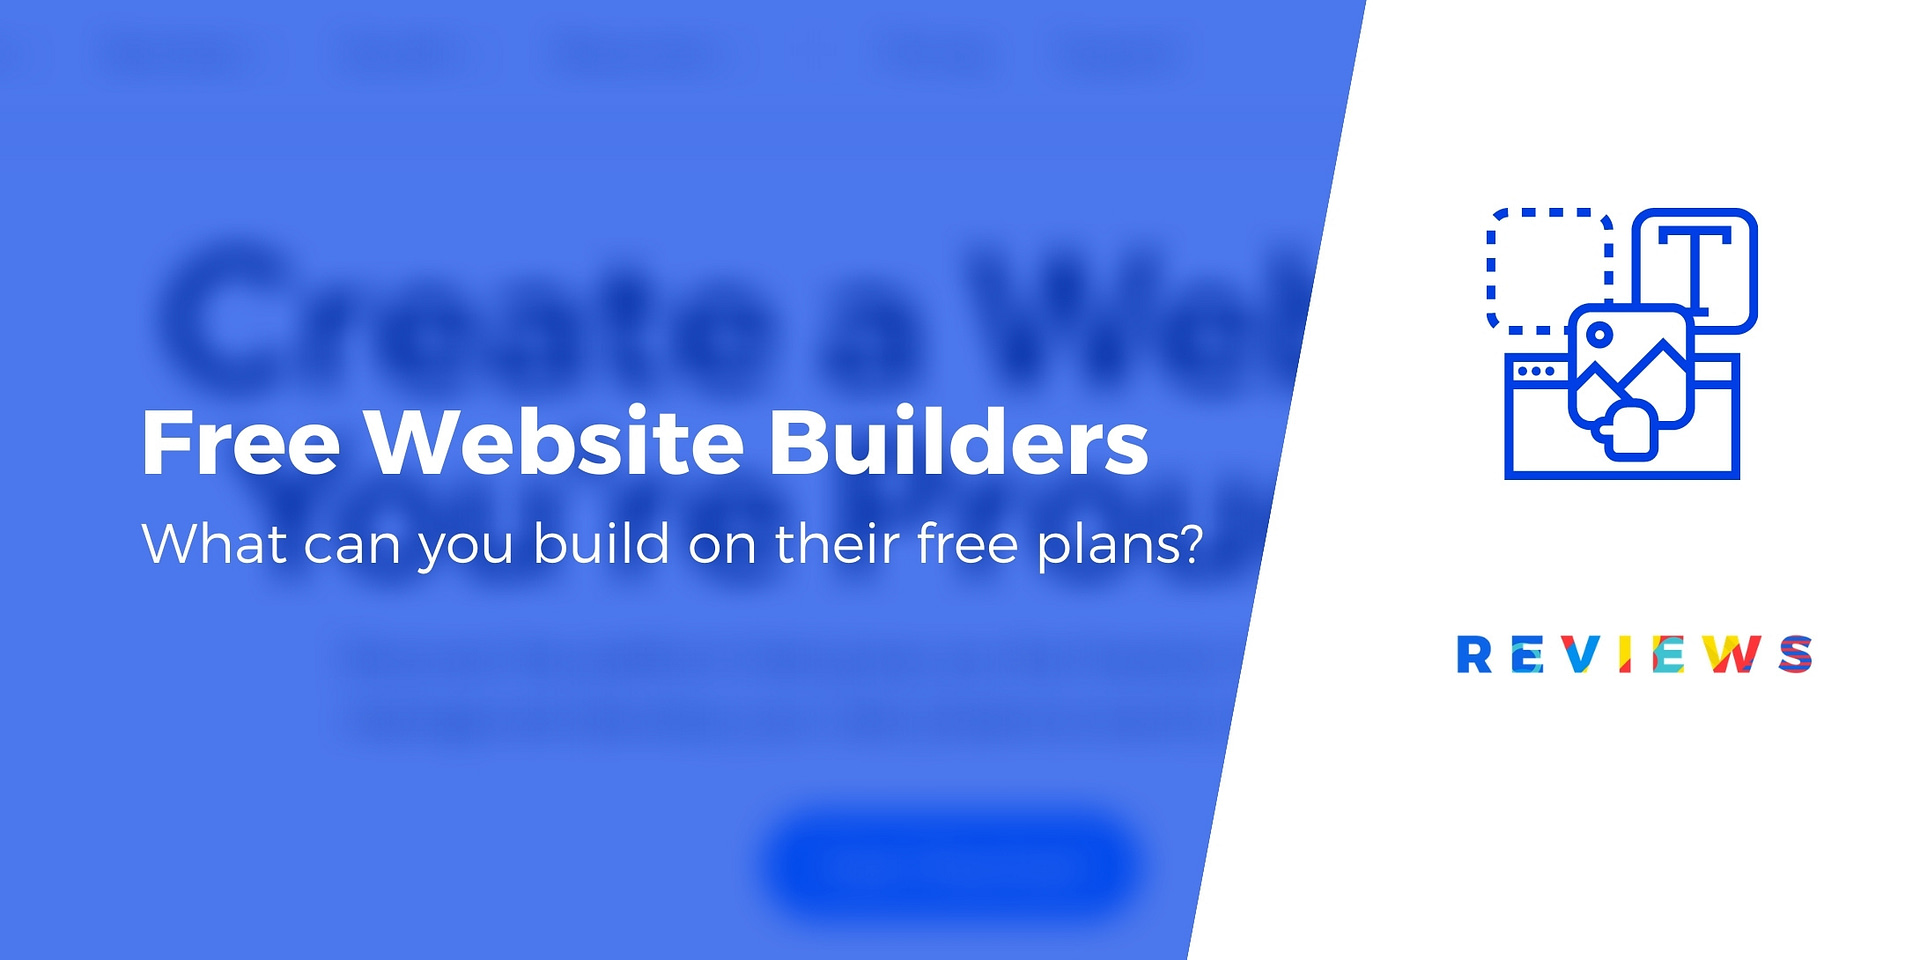 Discover How to Build a Do-It-Yourself Website